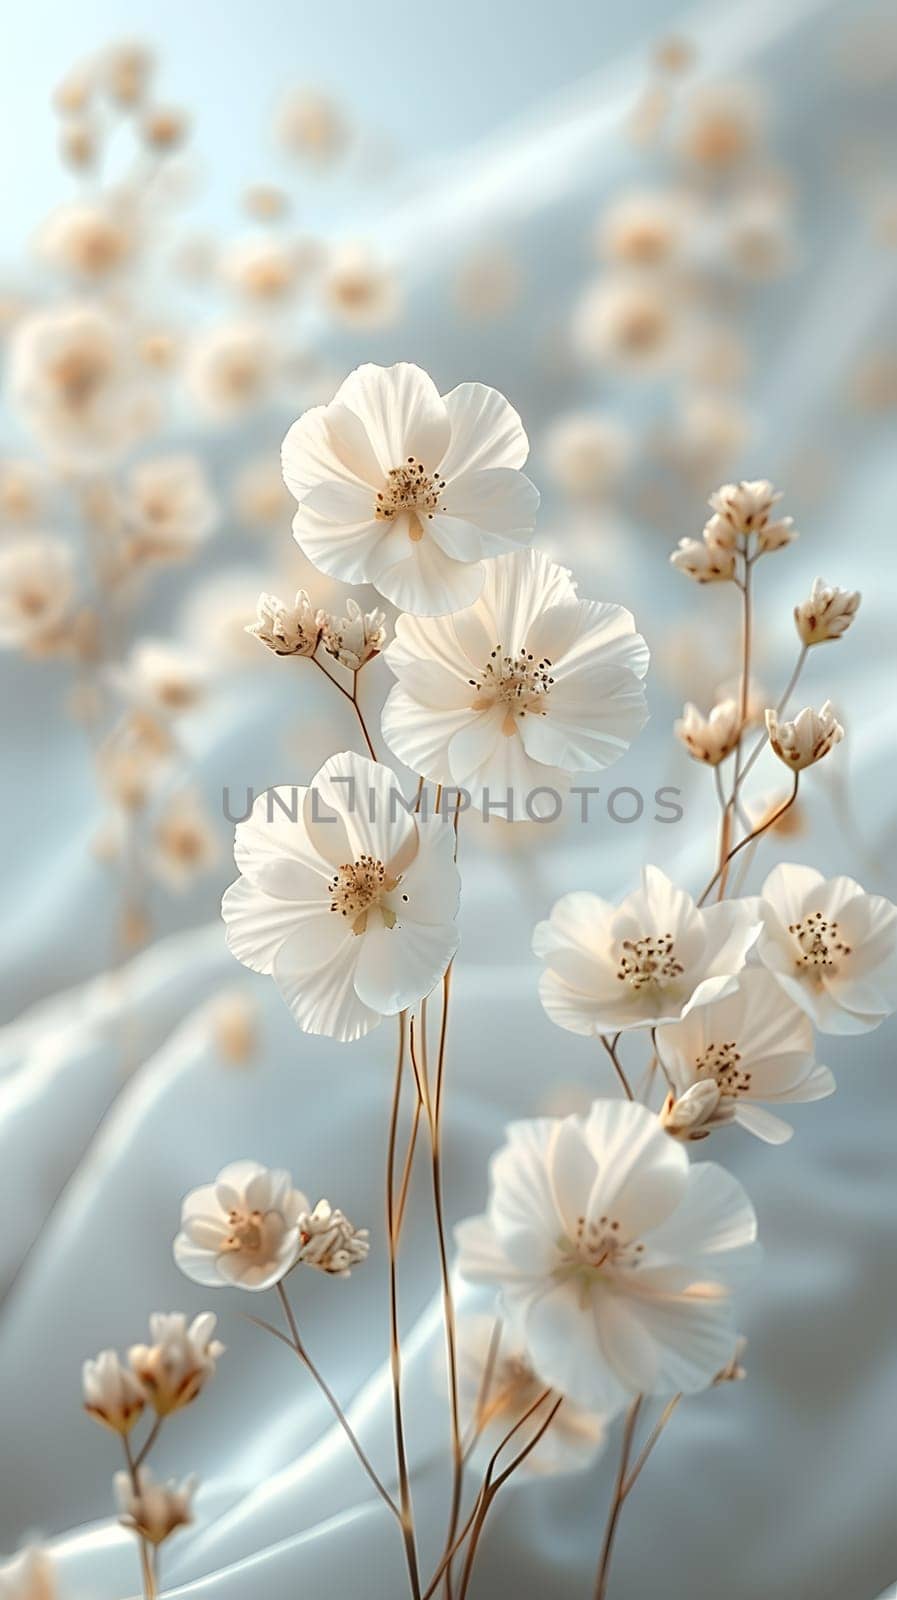 A variety of white flowers are blooming on a white cloth. The delicate petals, twigs, and pedicels create a beautiful floral display of terrestrial plants